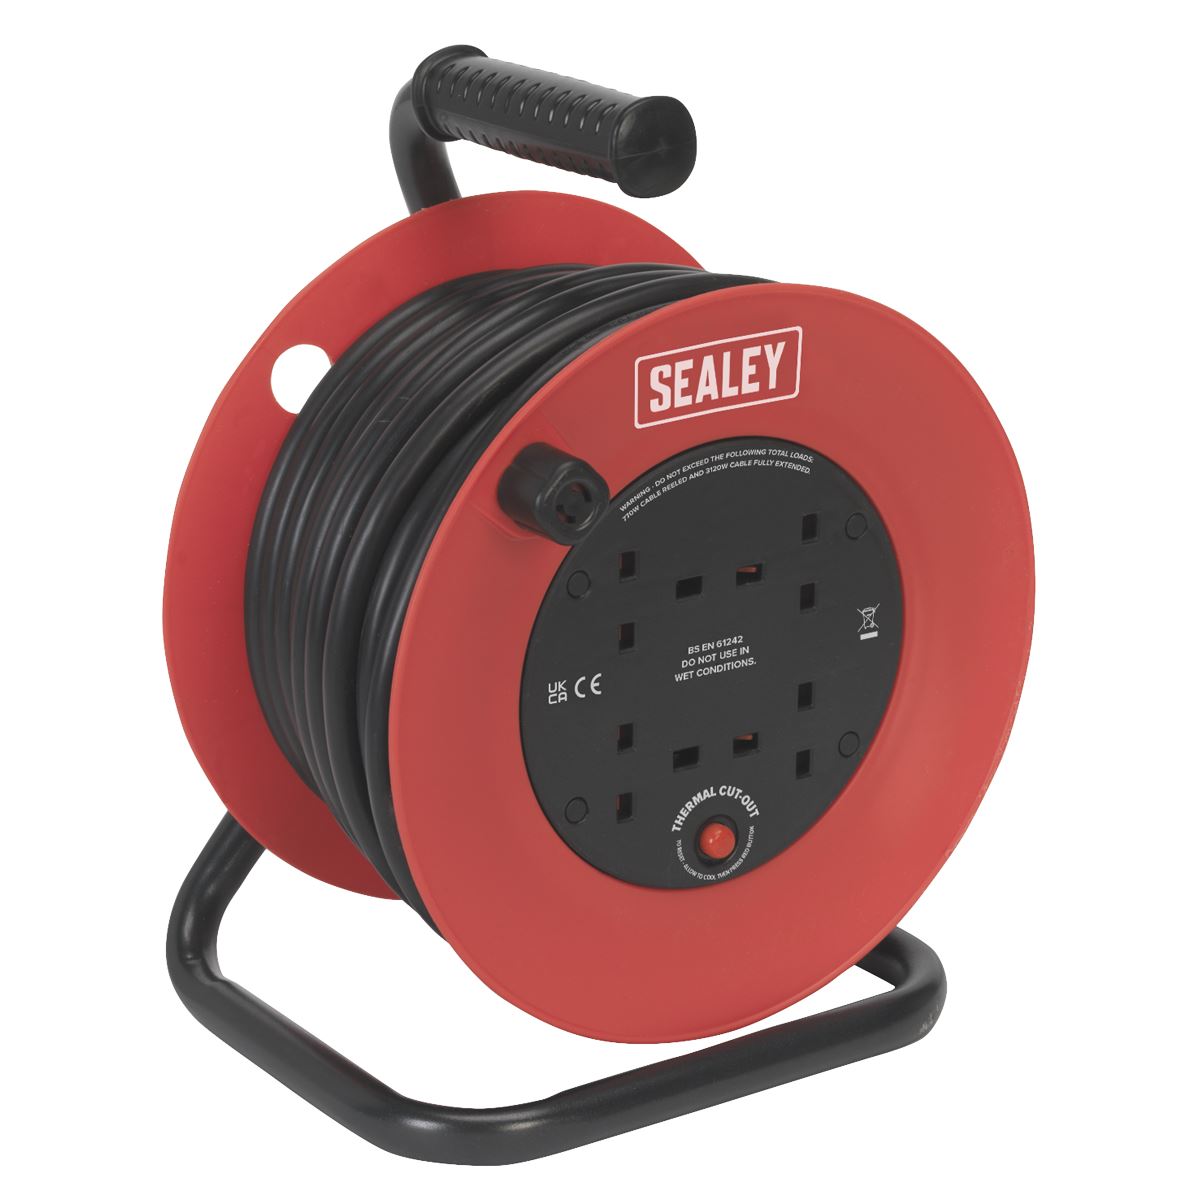 Sealey Cable Reel 25m 4 x 230V 2.5mm Heavy-Duty Thermal Trip CR22525